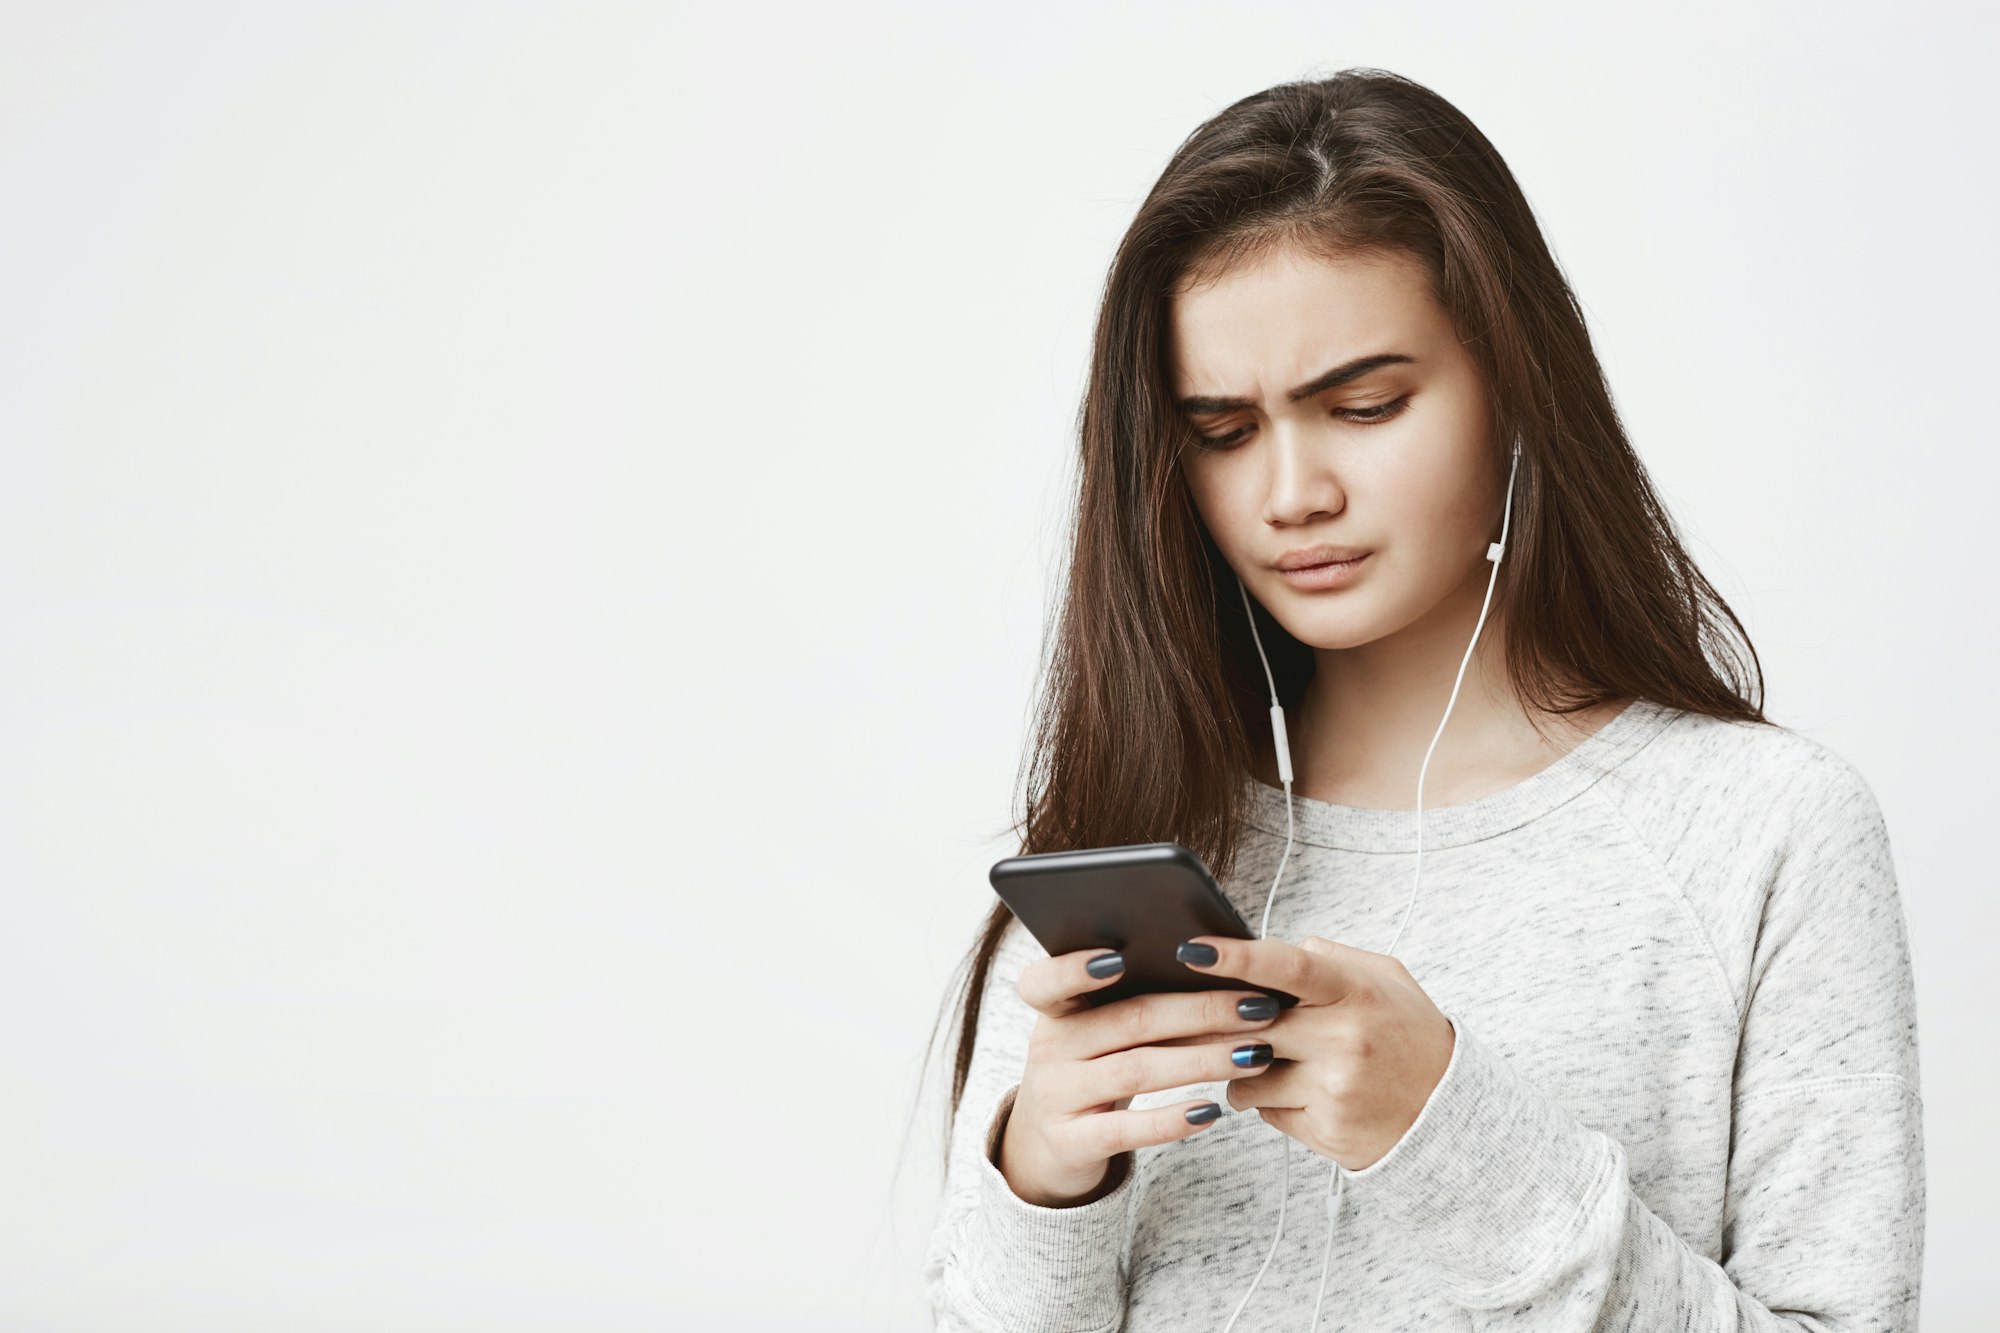 Attractive young female with worried expression holds phone and listen music, over white background